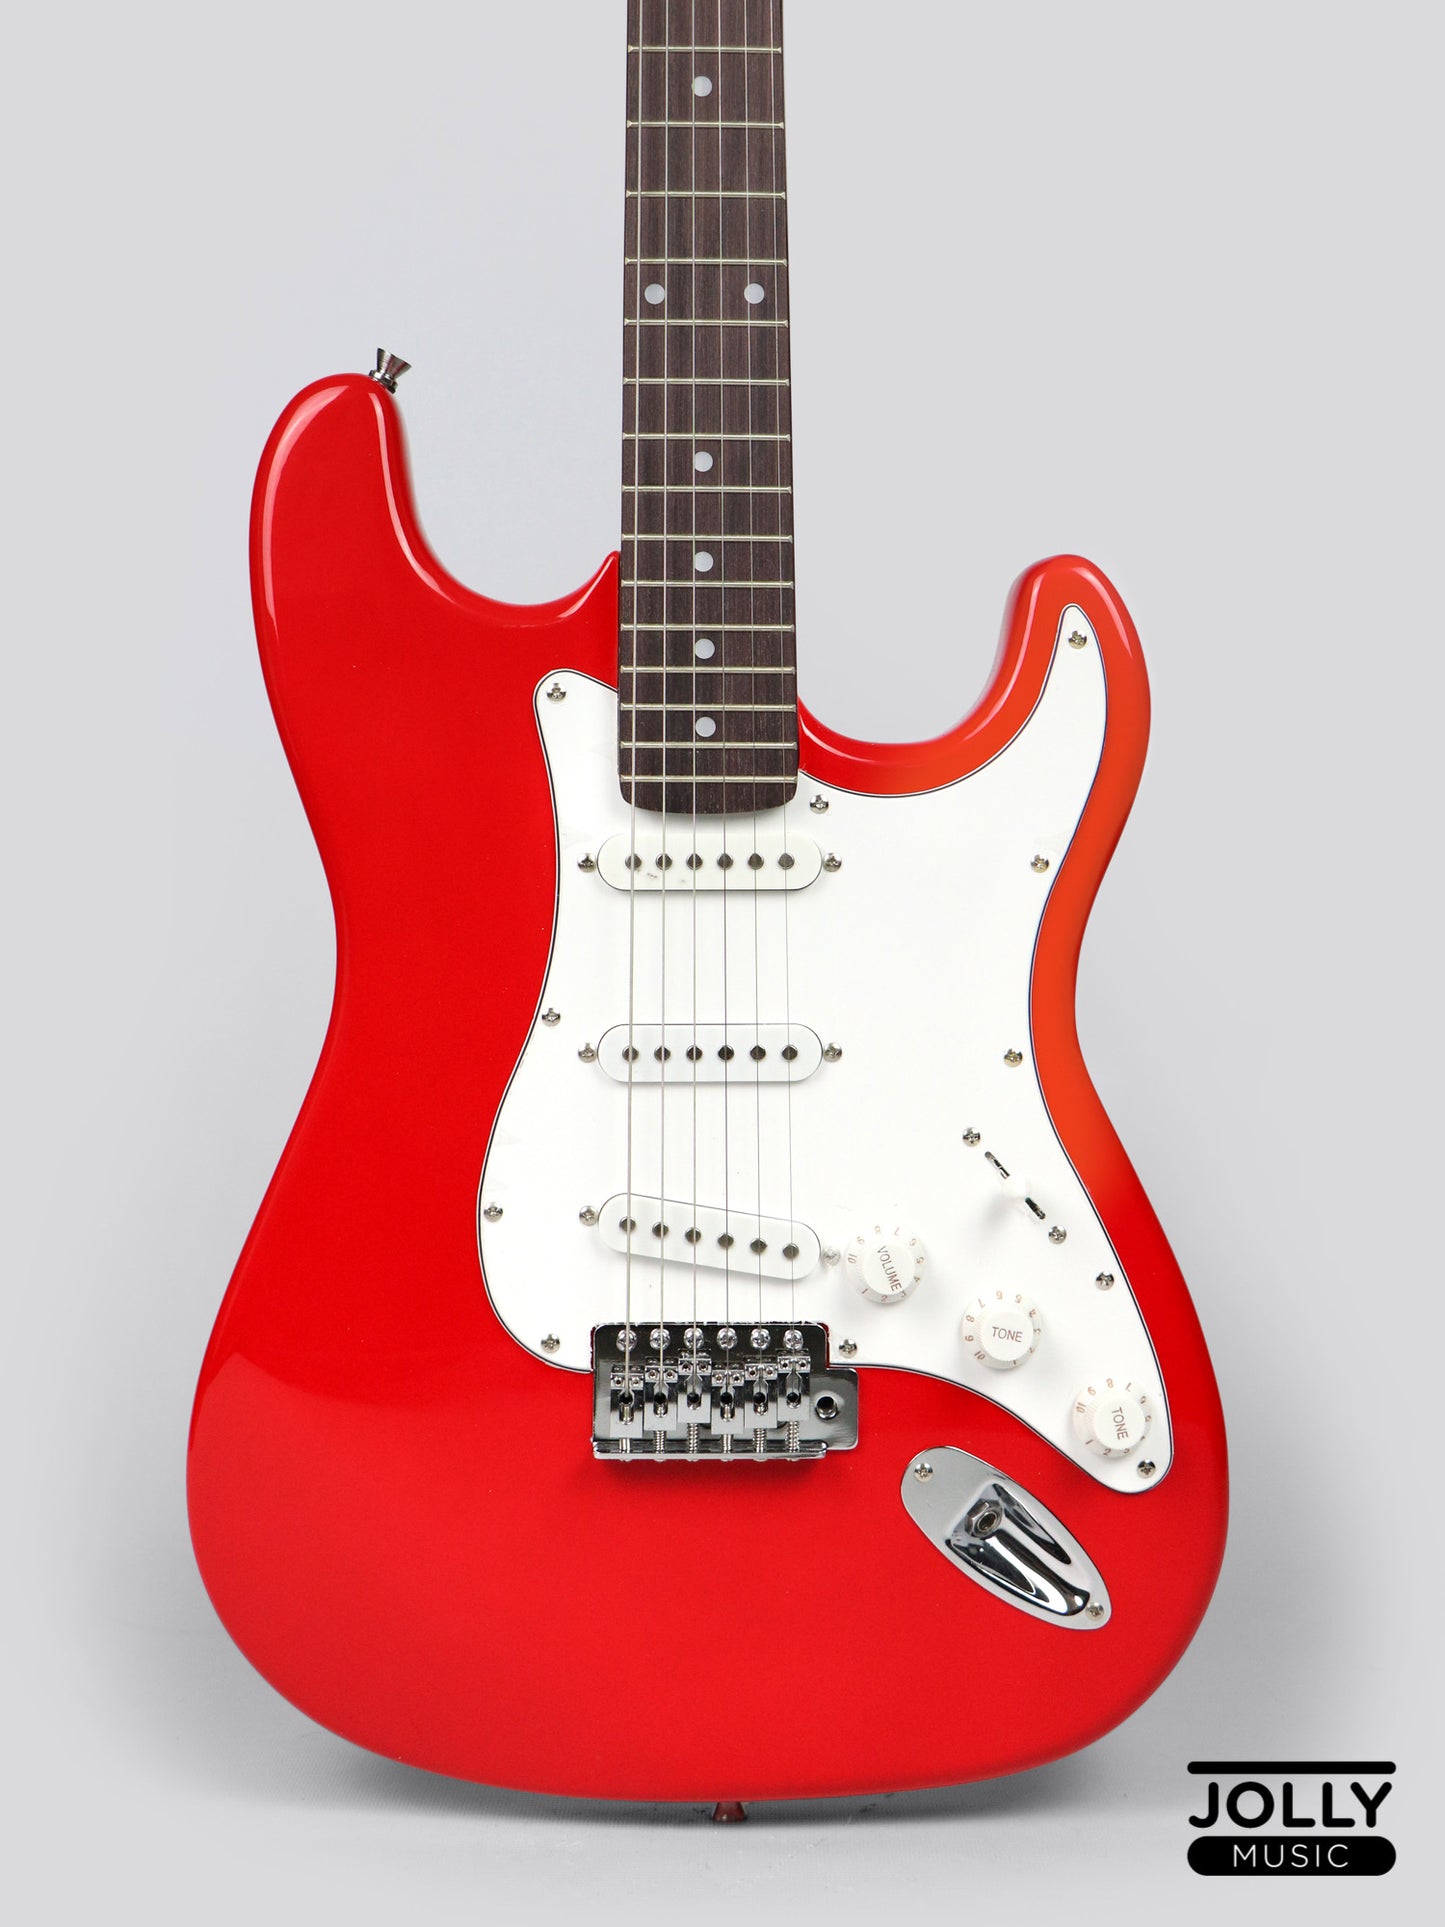 Deviser S-Style L-G1 Electric Guitar - Red